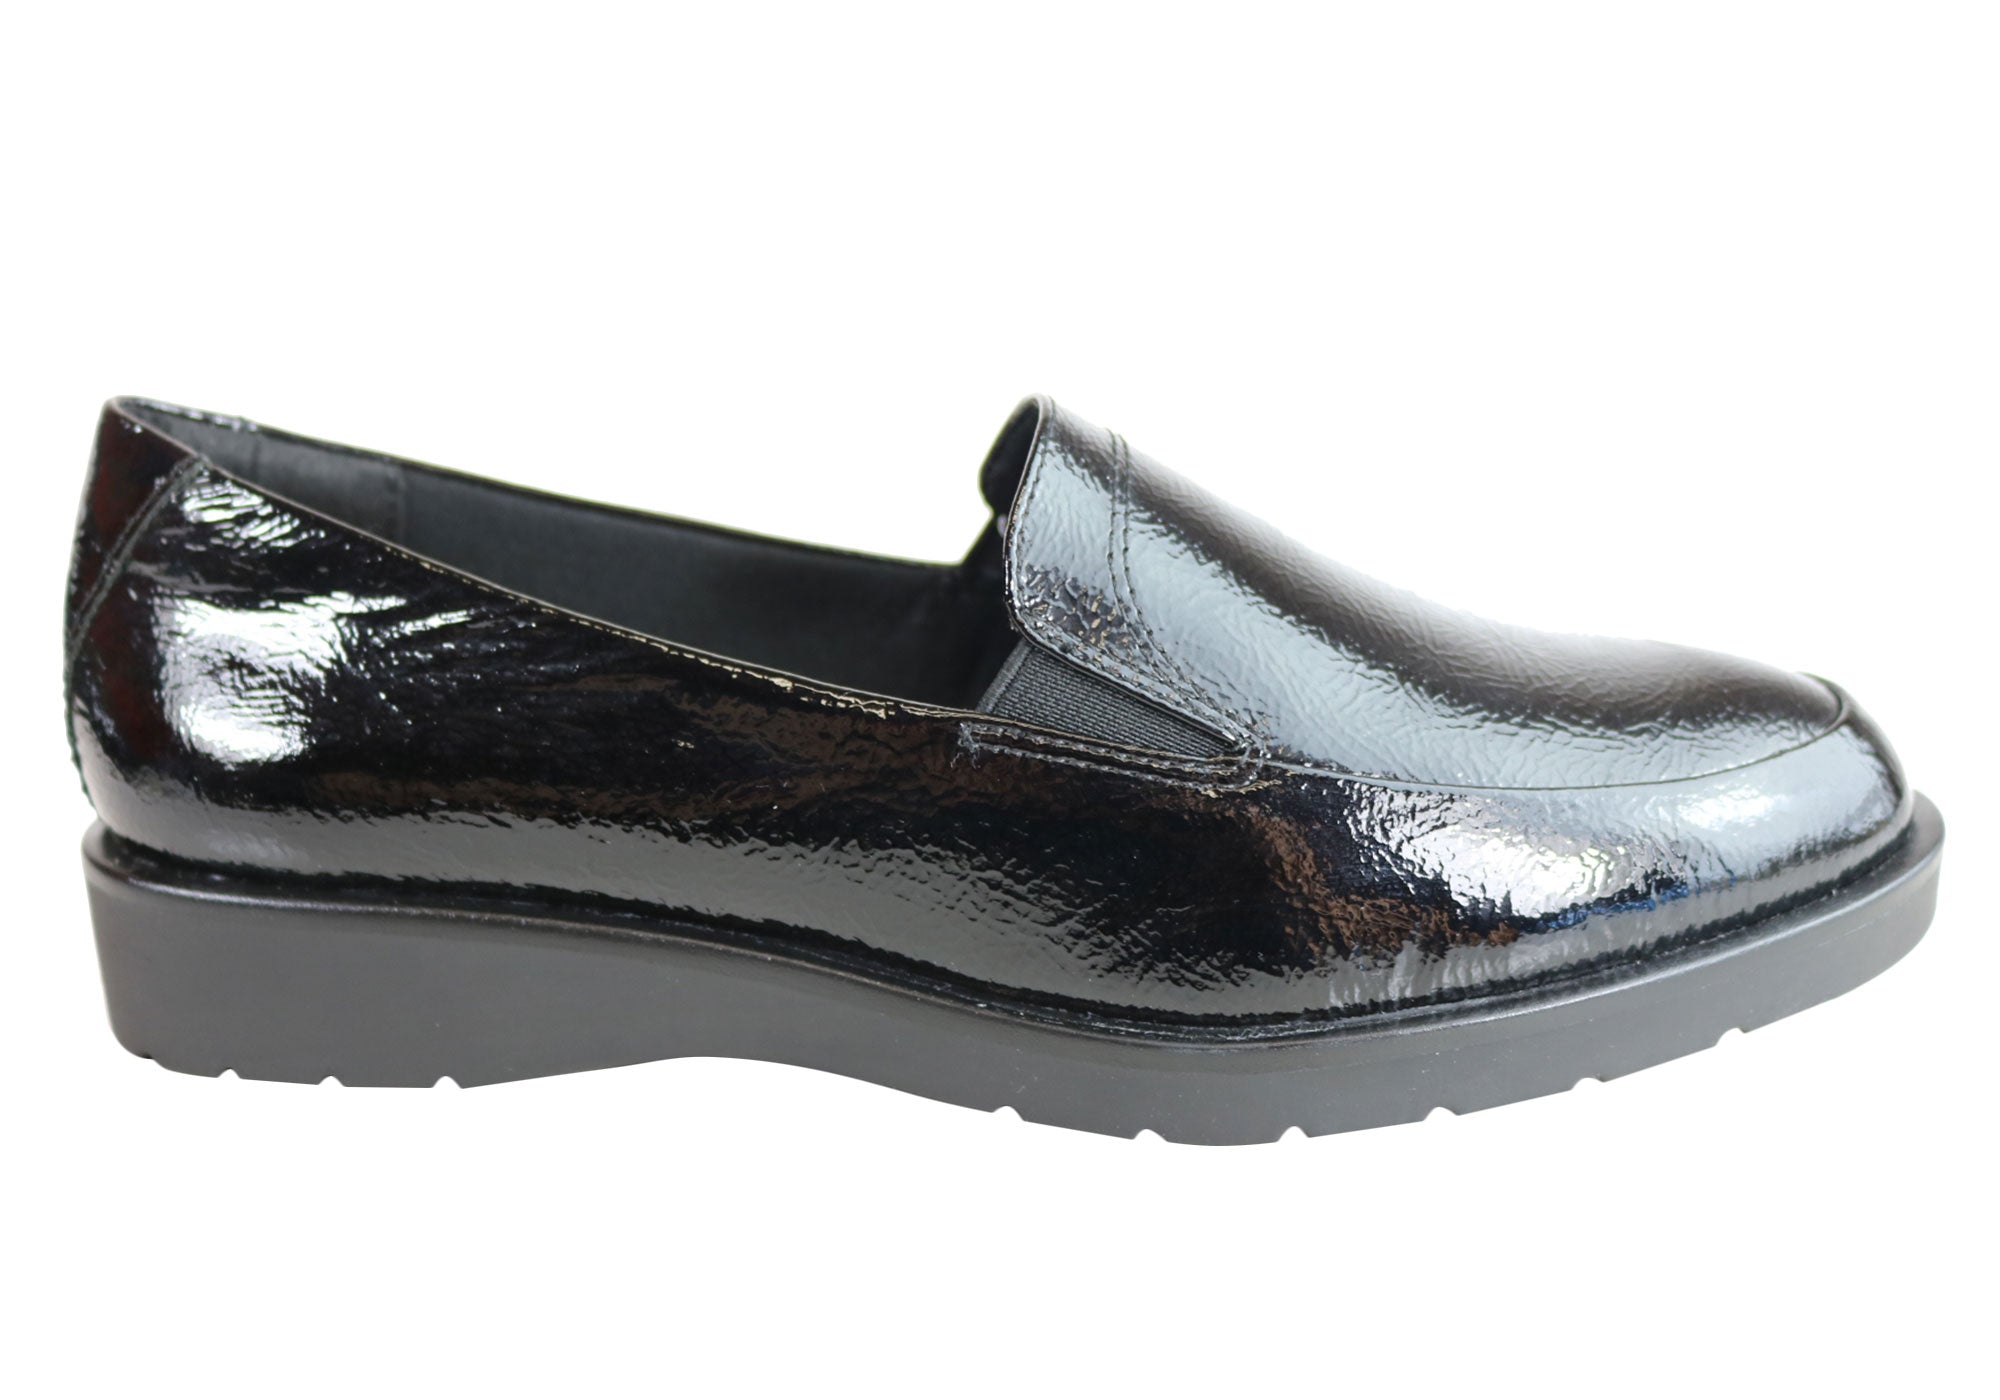 comfortable black loafers women's